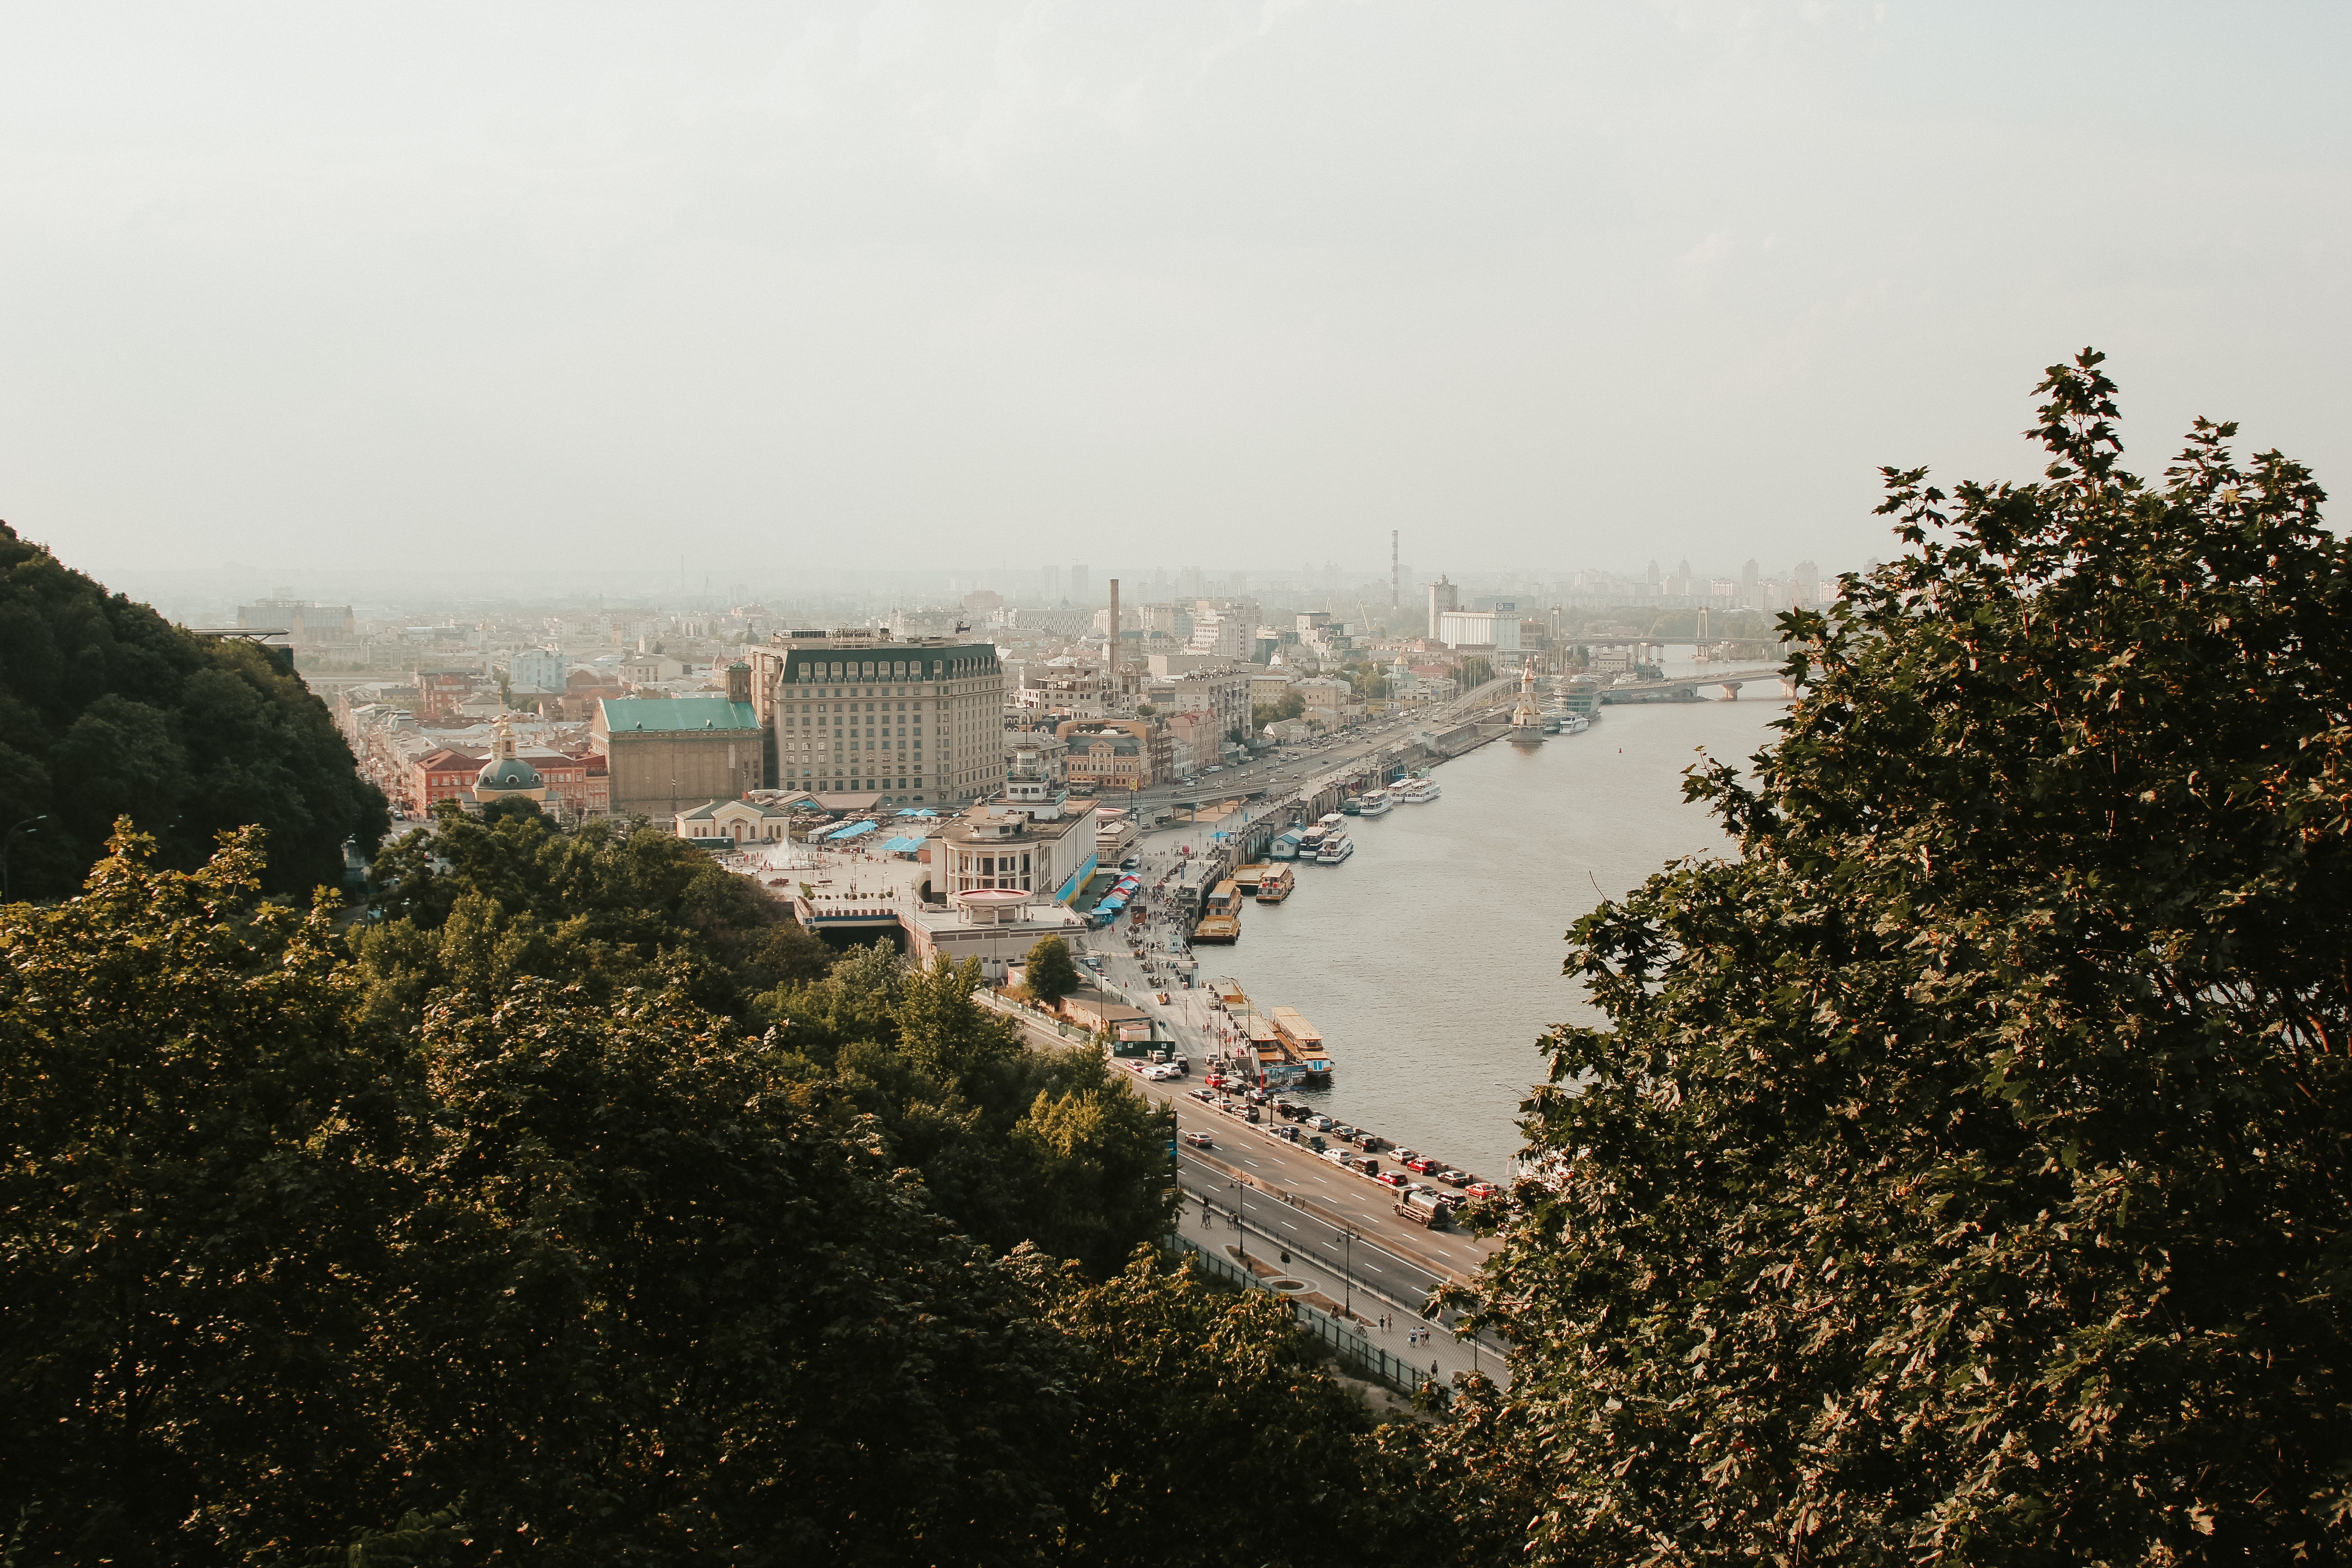 Photot of Kyiv - main river Dnipro in particular